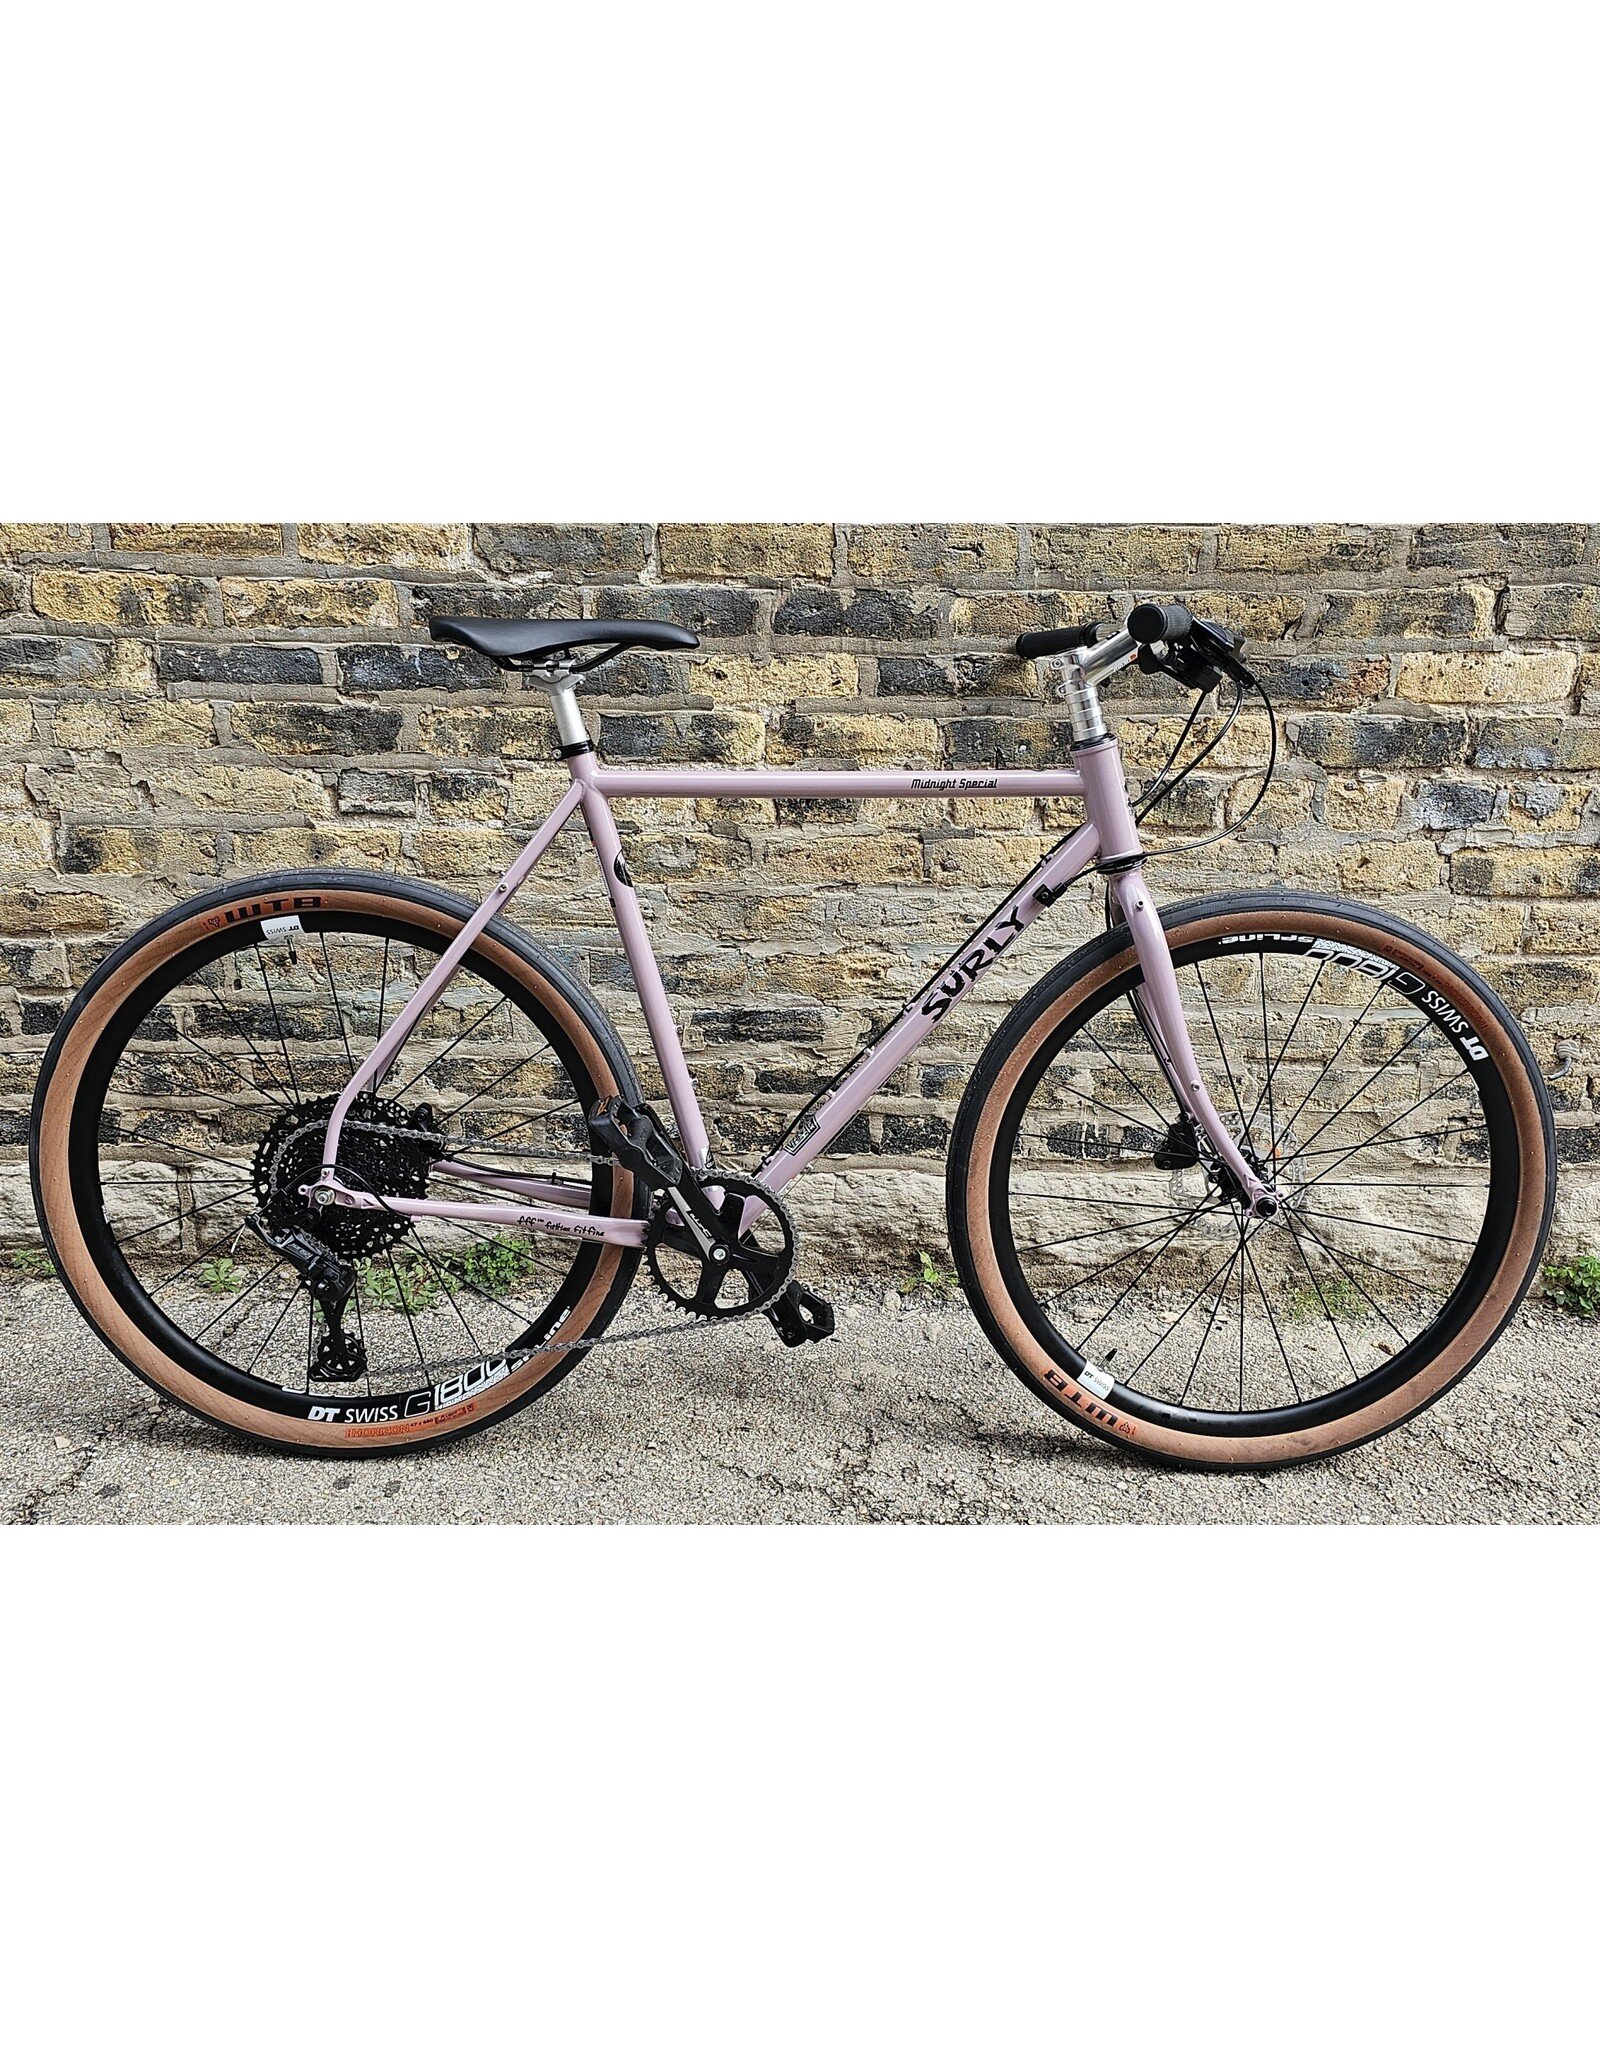 Surly Surly Midnight Special Shop Build  Flat 1x10 Lilac 650b 54cm